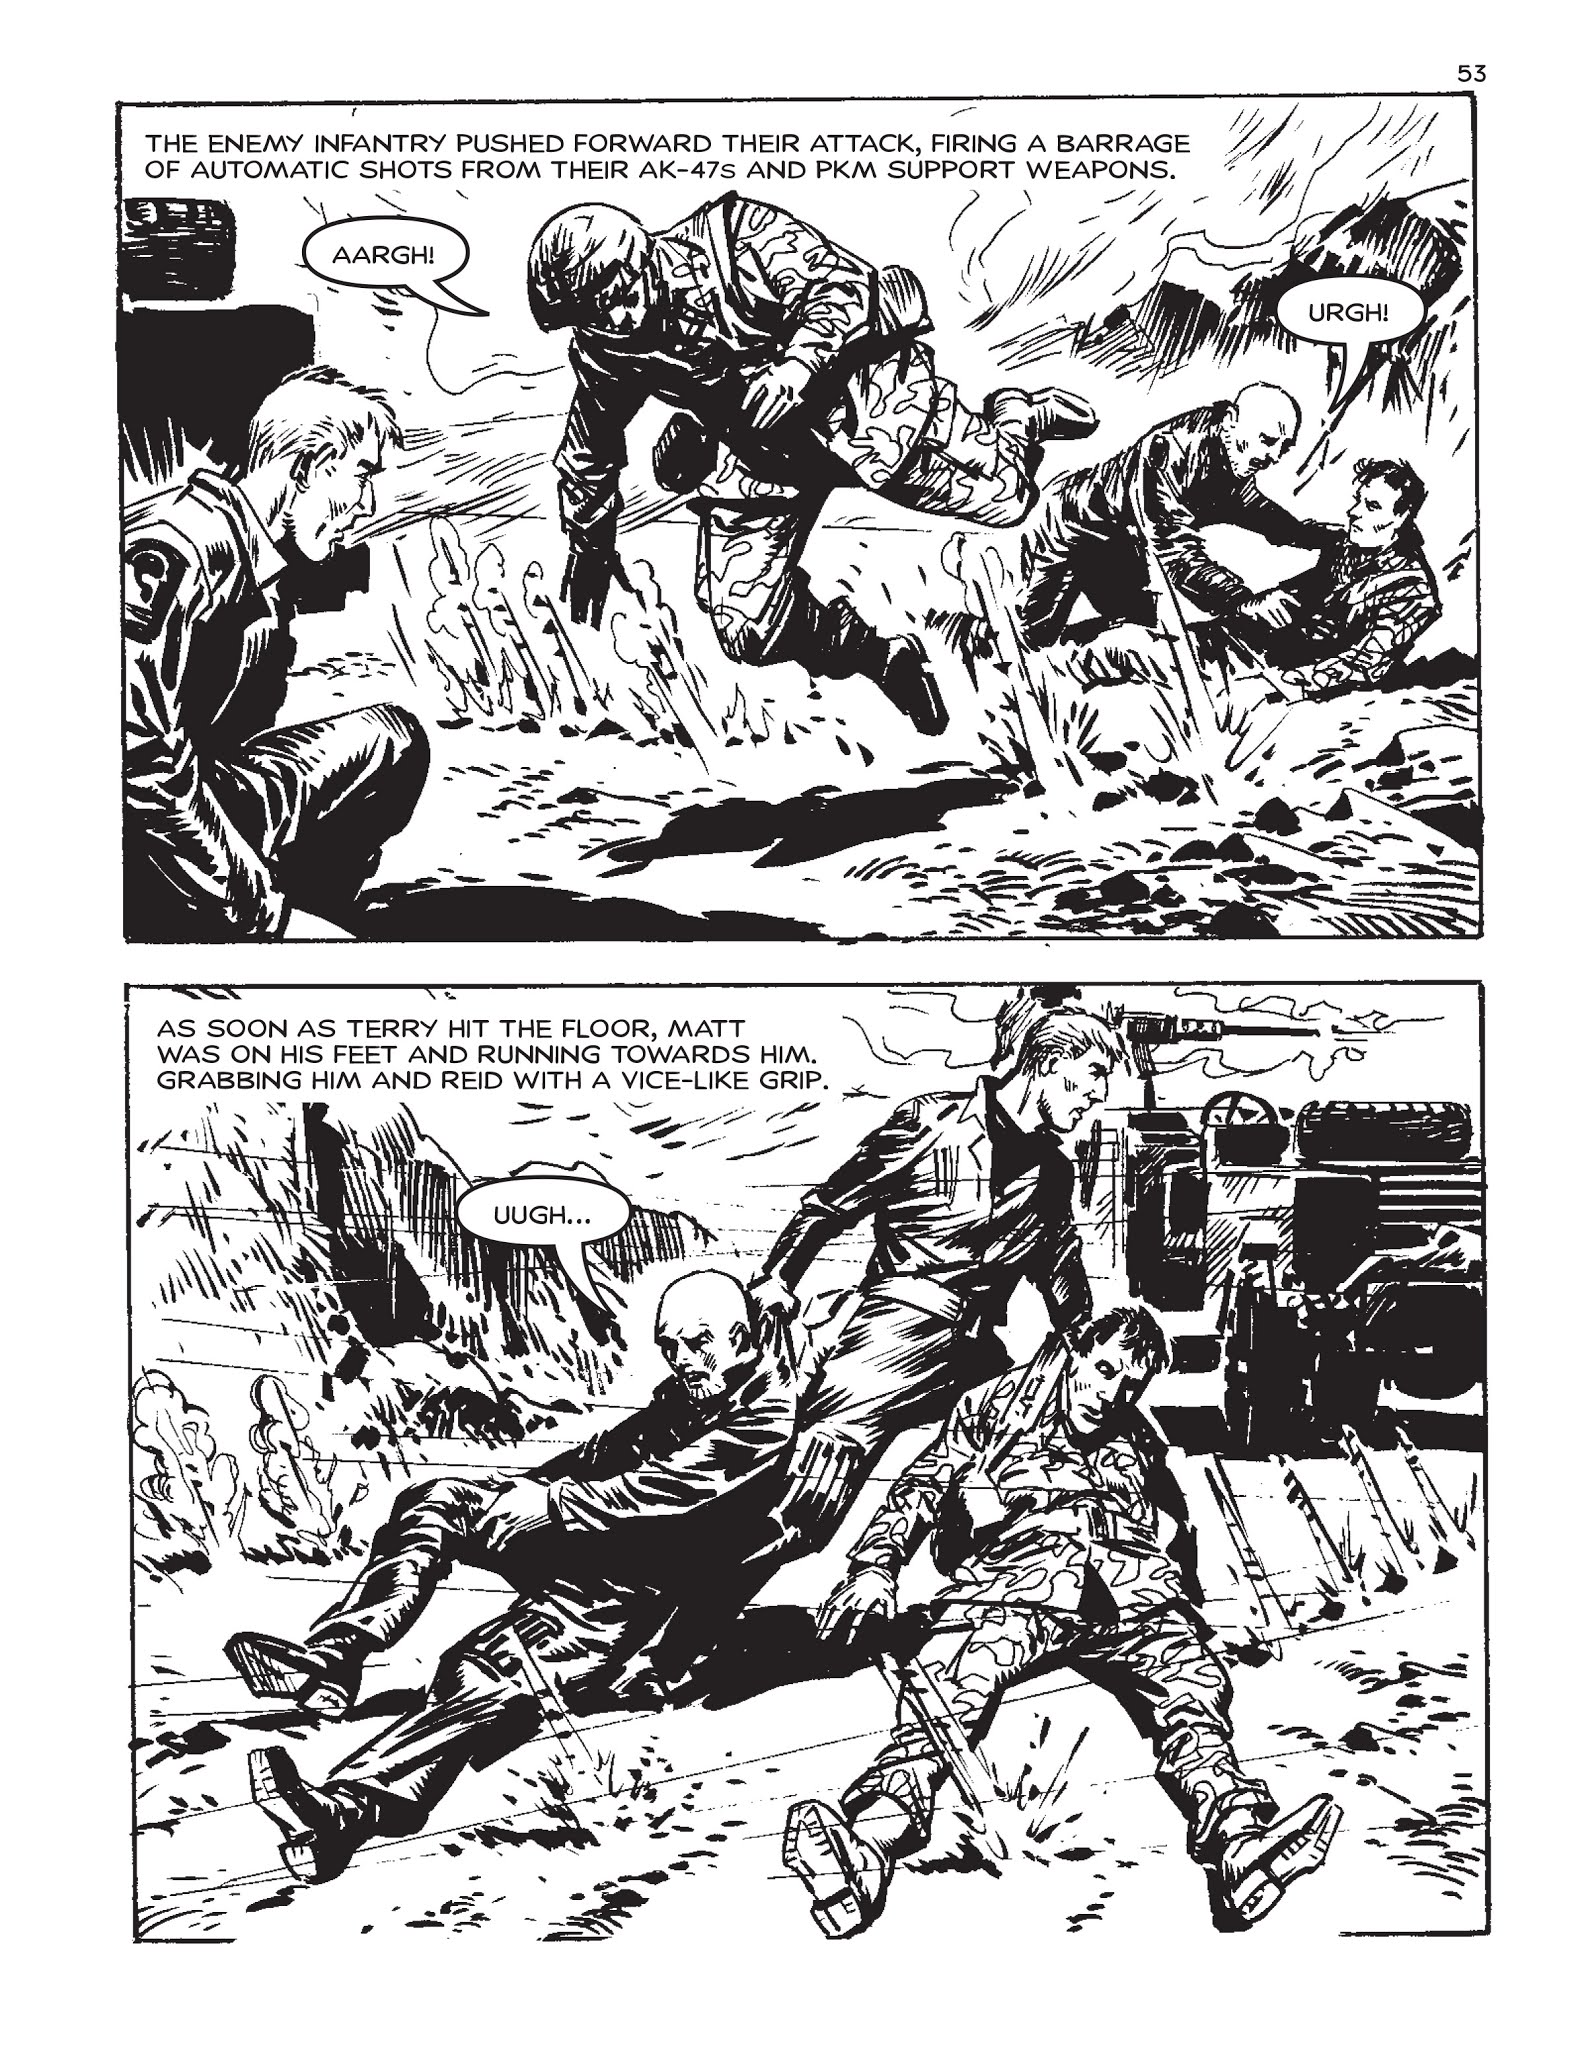 Read online Commando: For Action and Adventure comic -  Issue #5189 - 52